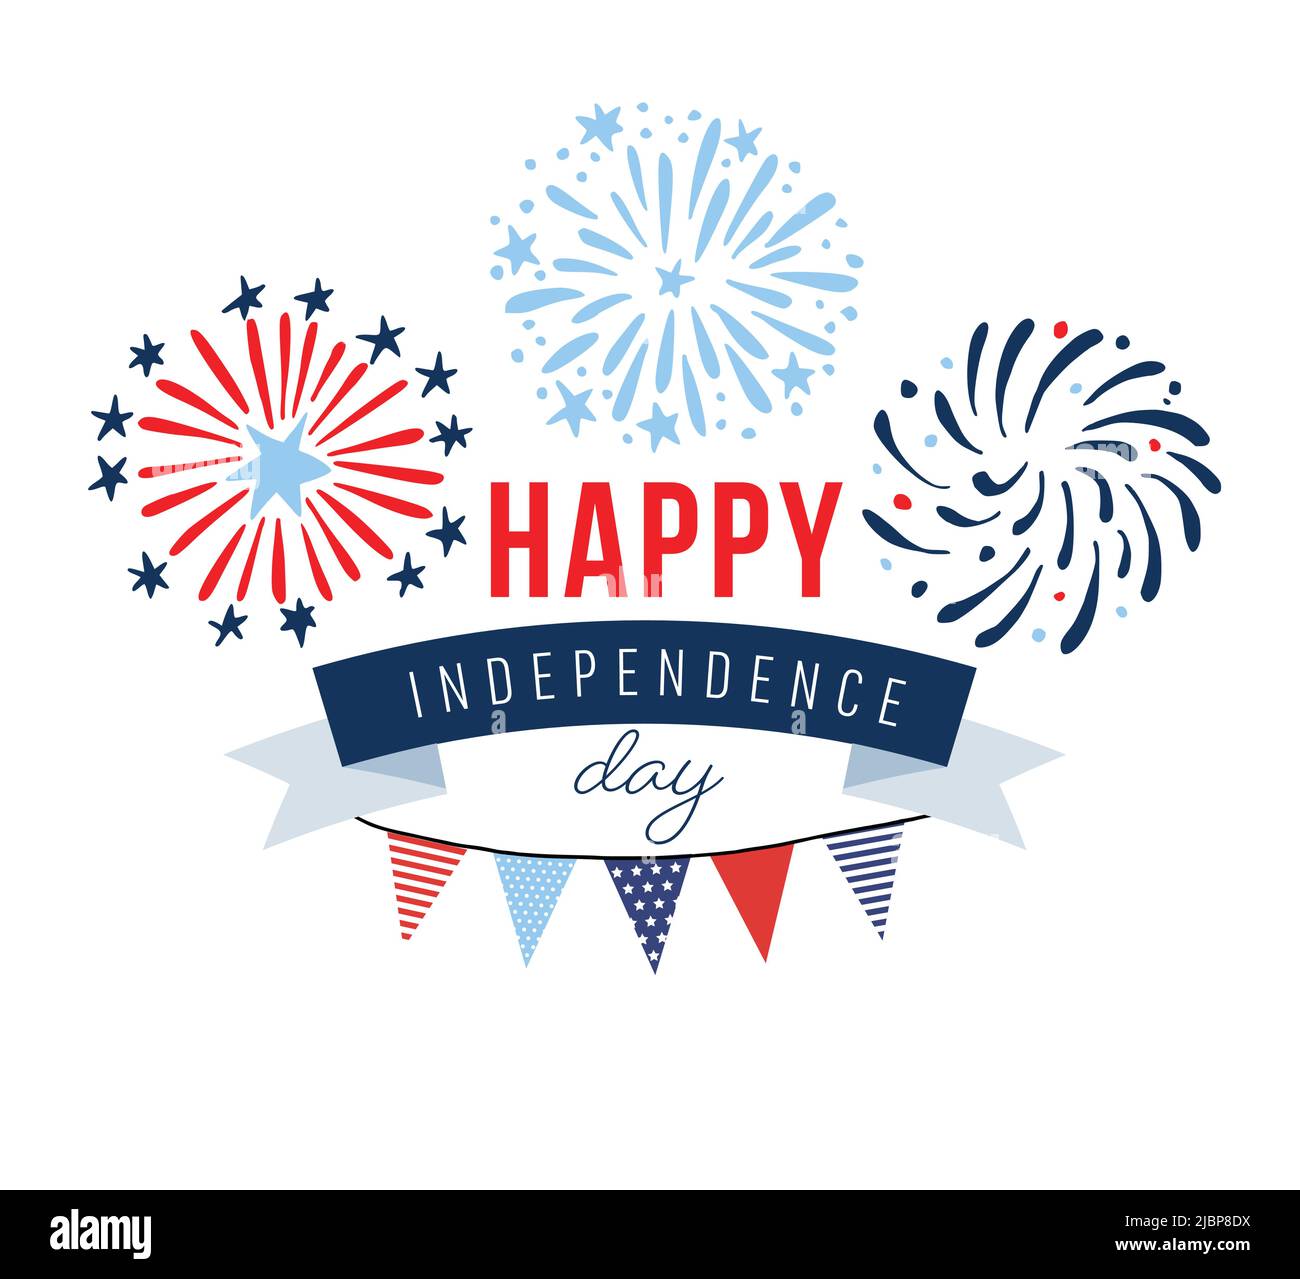 Happy Independence day, 4th July national holiday. Greeting card, invitation. Hand drawn fireworks, party bunting flags. USA colors. Vector Stock Vector